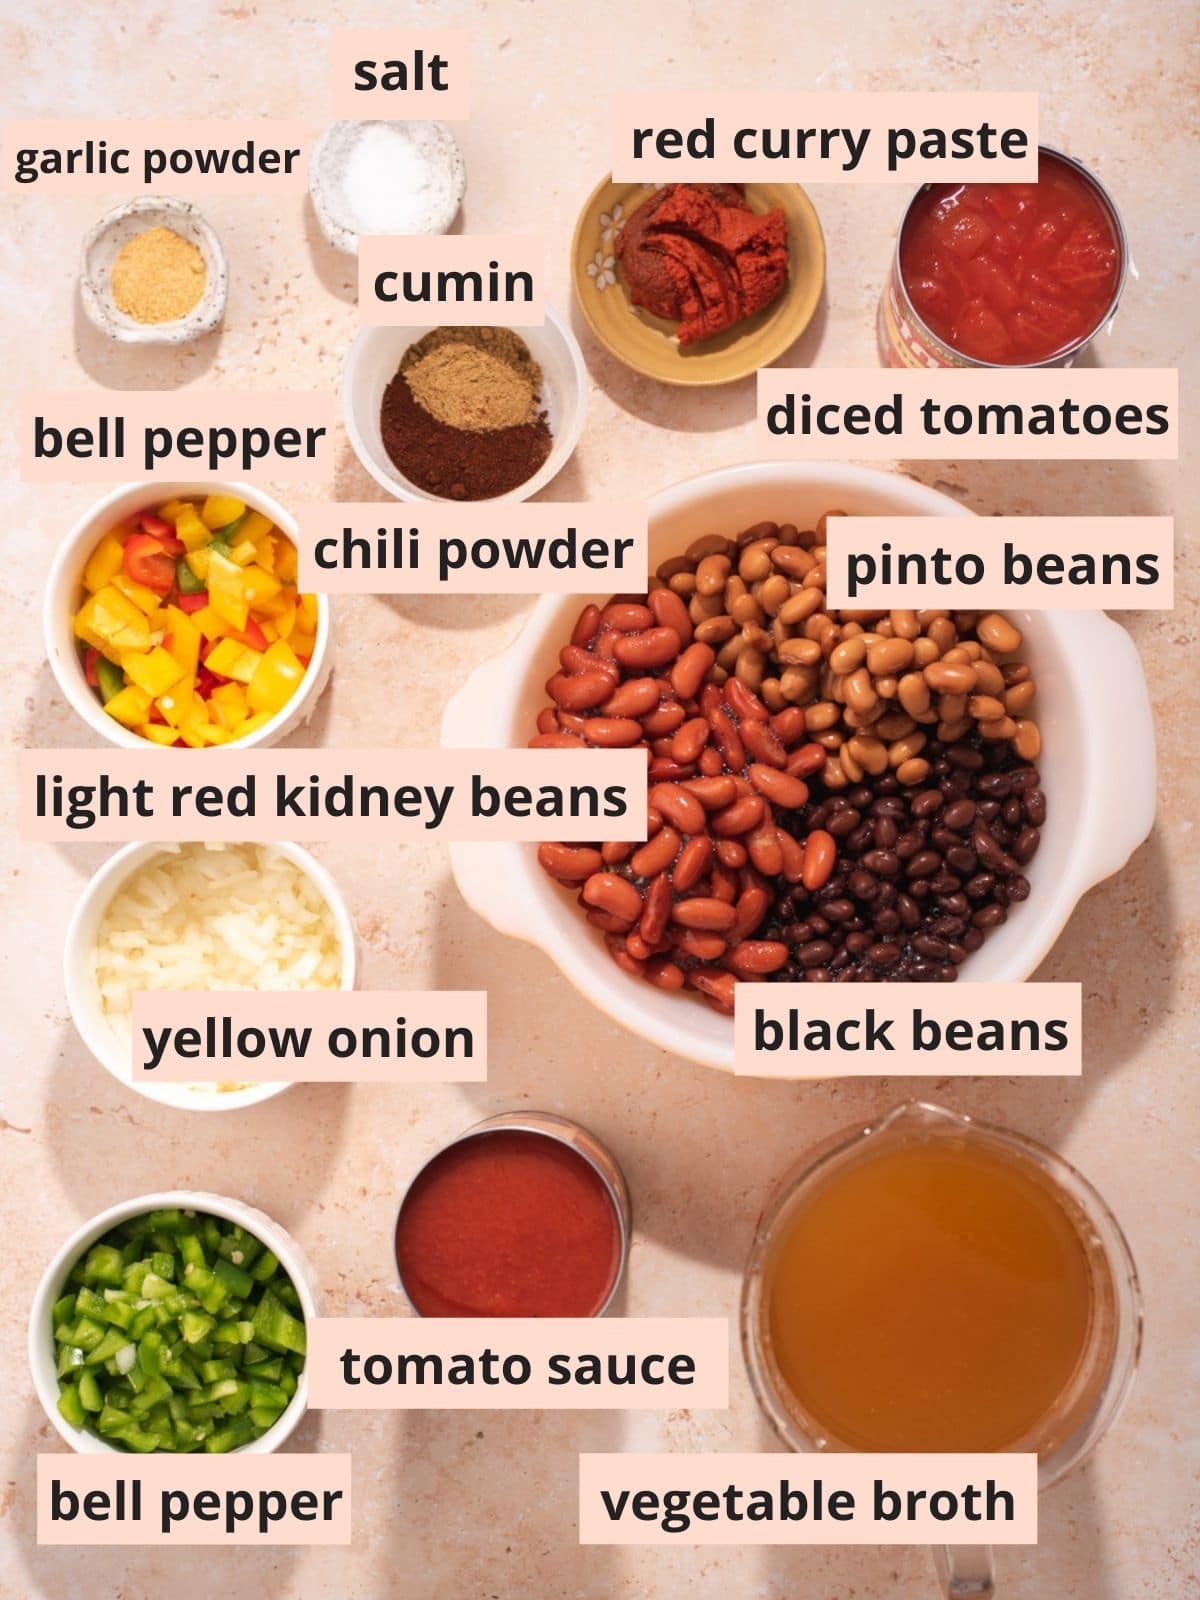 Labeled ingredients used to make chili